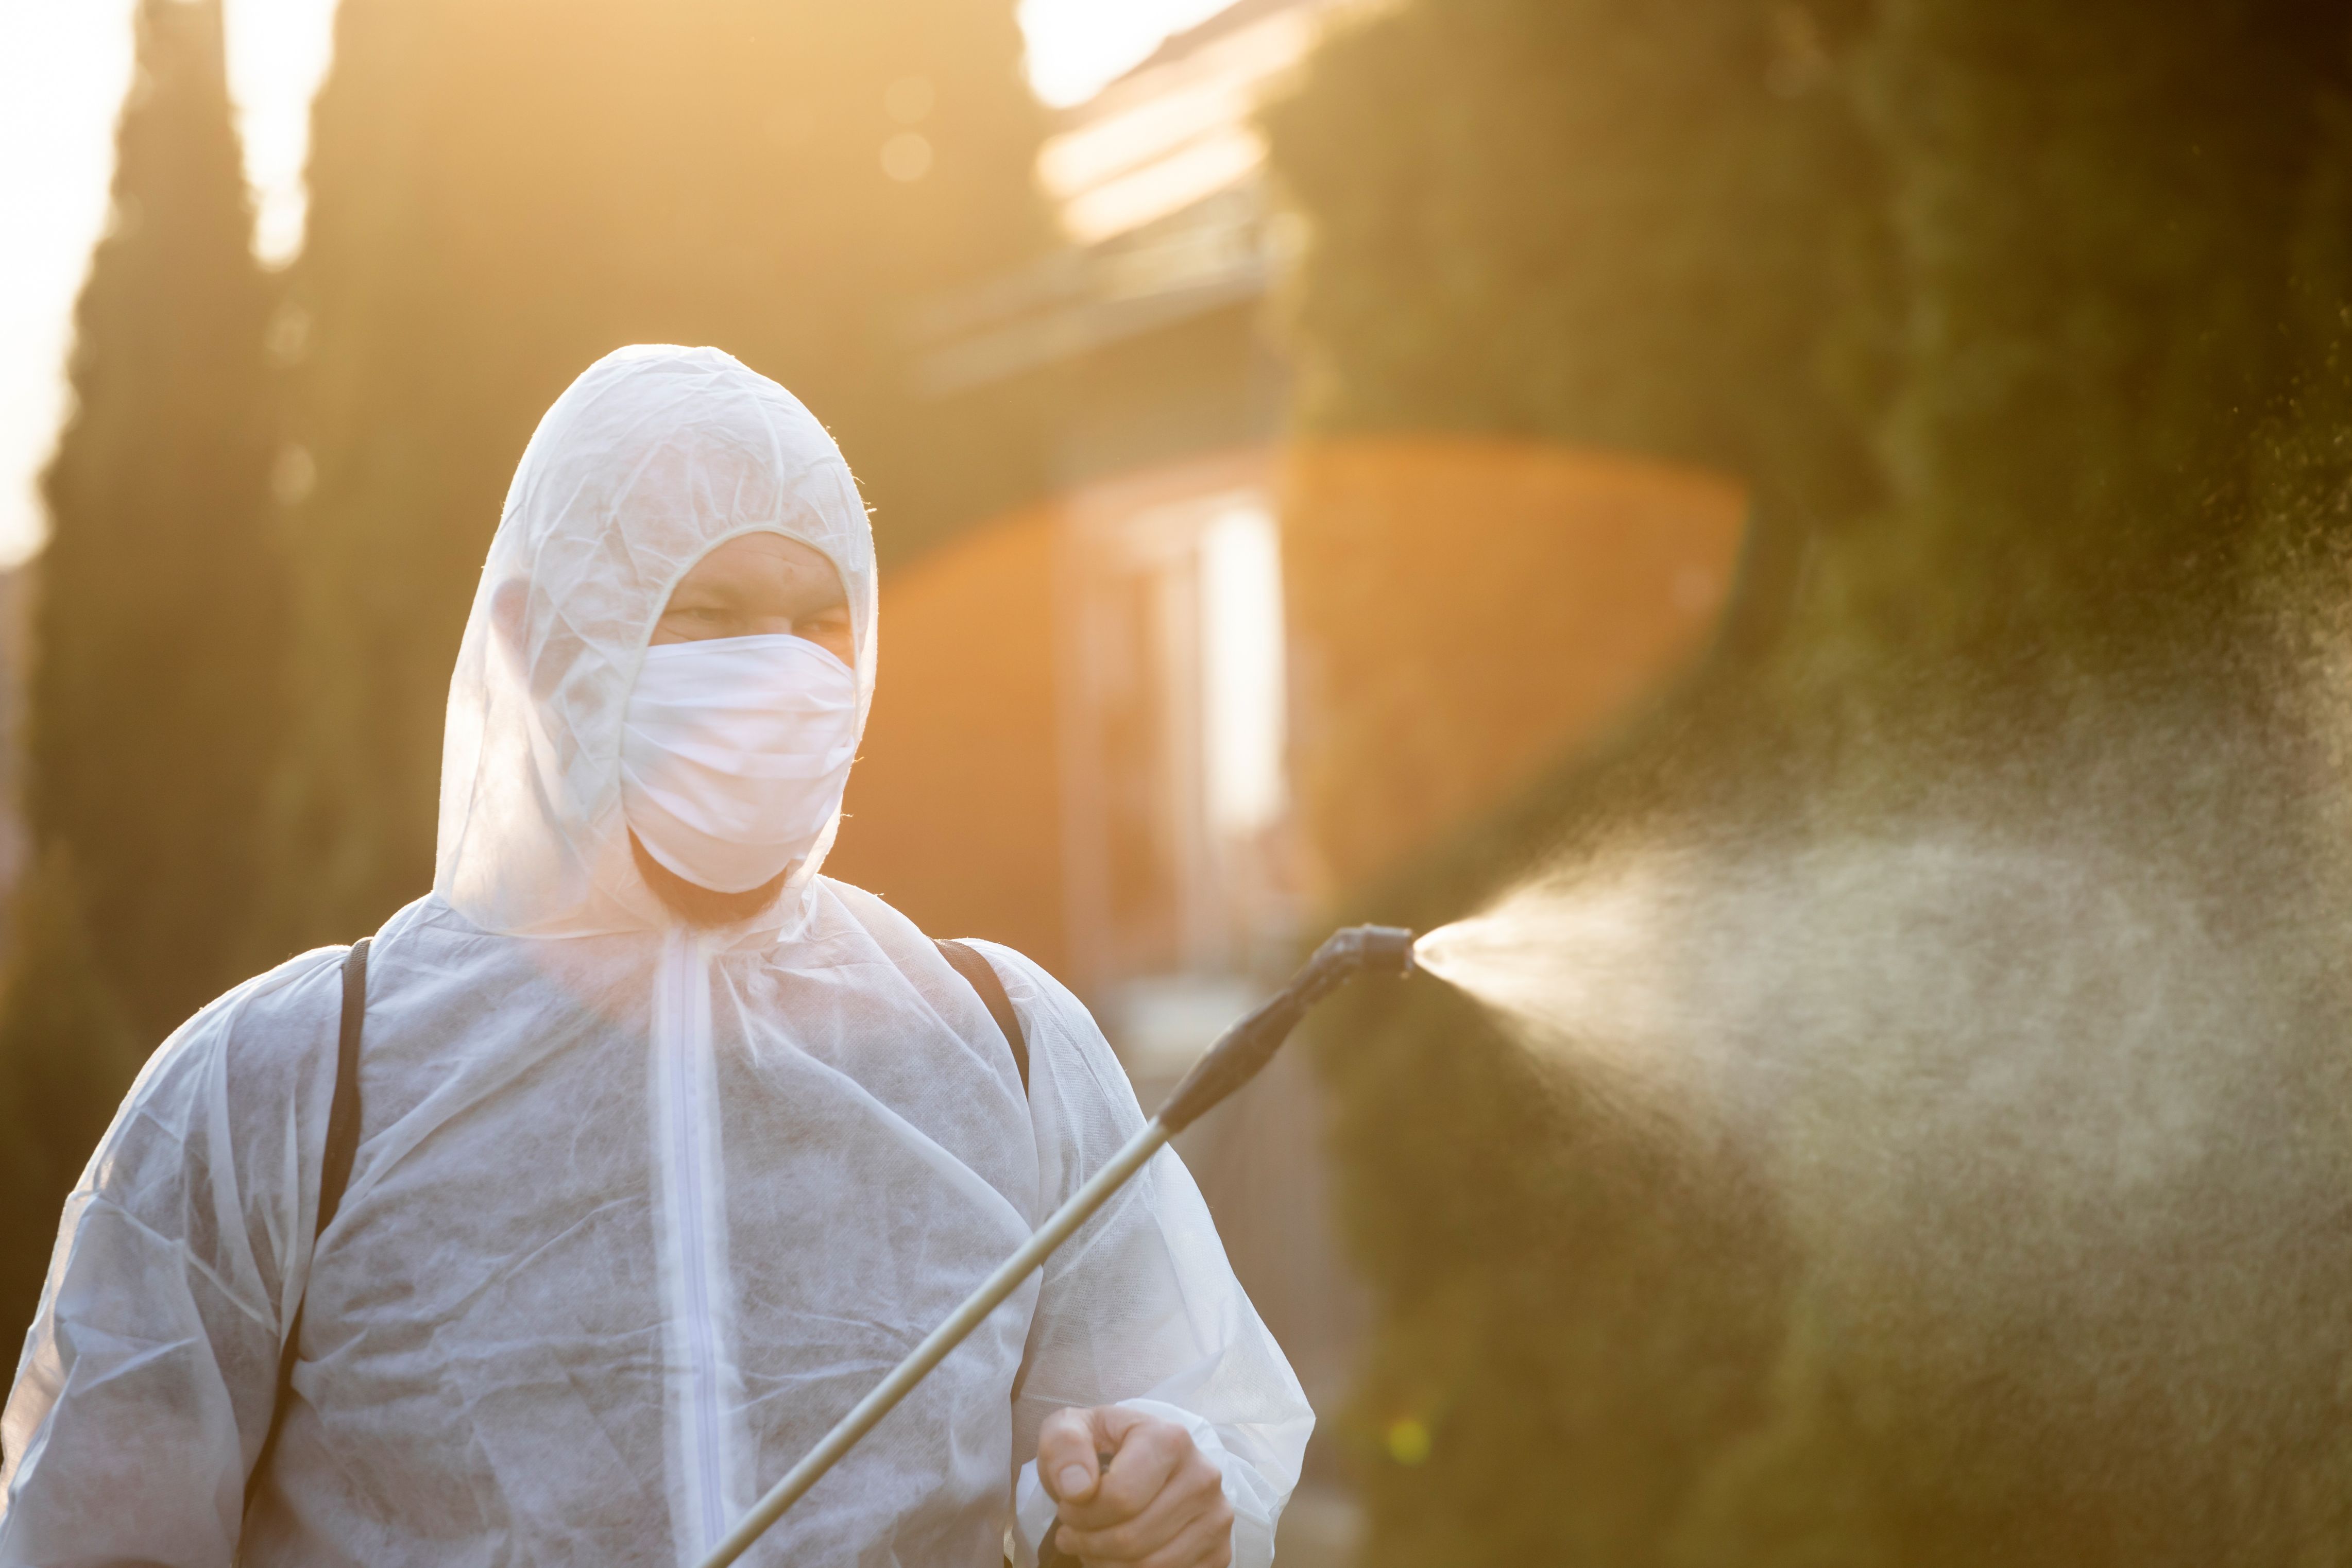 Choosing Commercial Disinfecting Companies